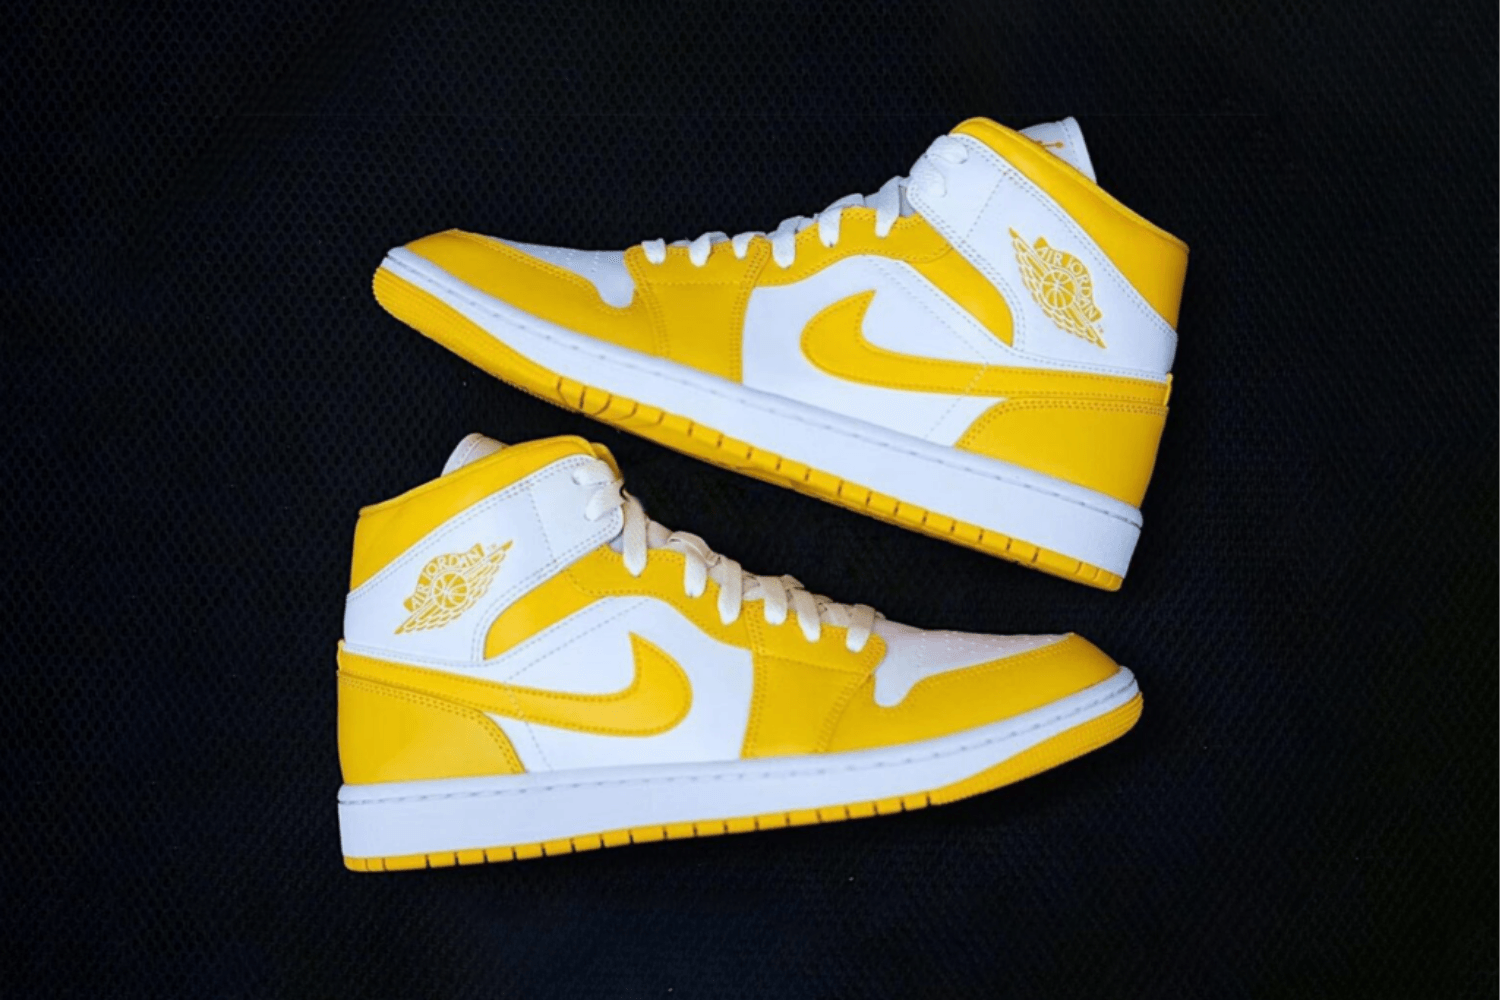 The Air Jordan 1 Mid comes in yellow and white